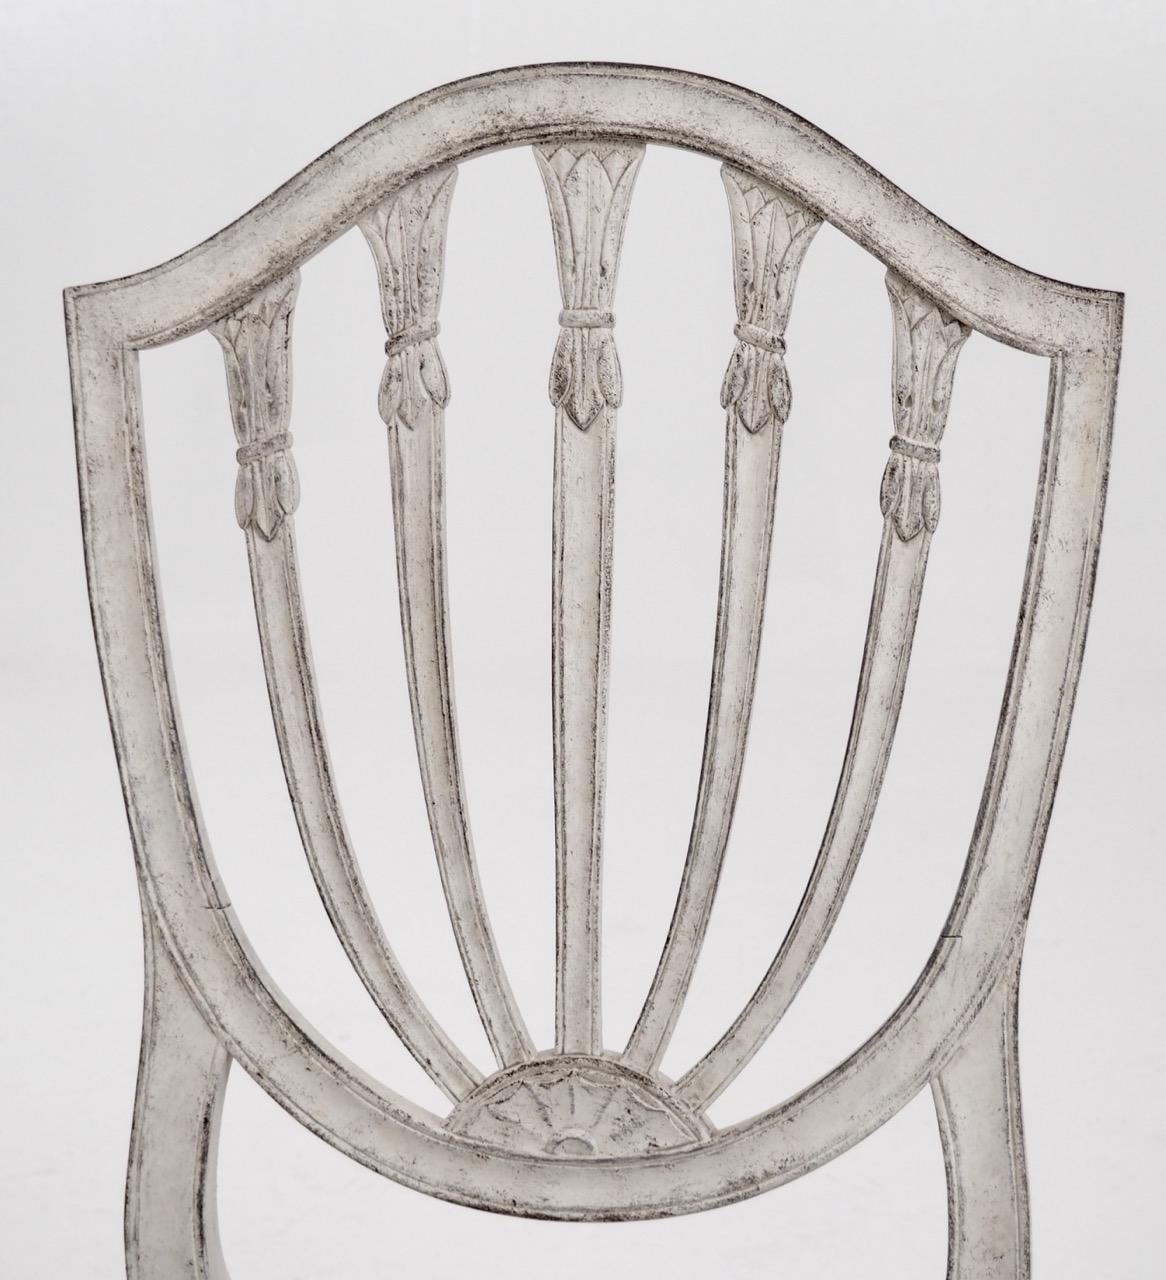 Gustavian Set of 8 Chairs, Probably Danish, in the Style of C.J. Lillie, 19th Century